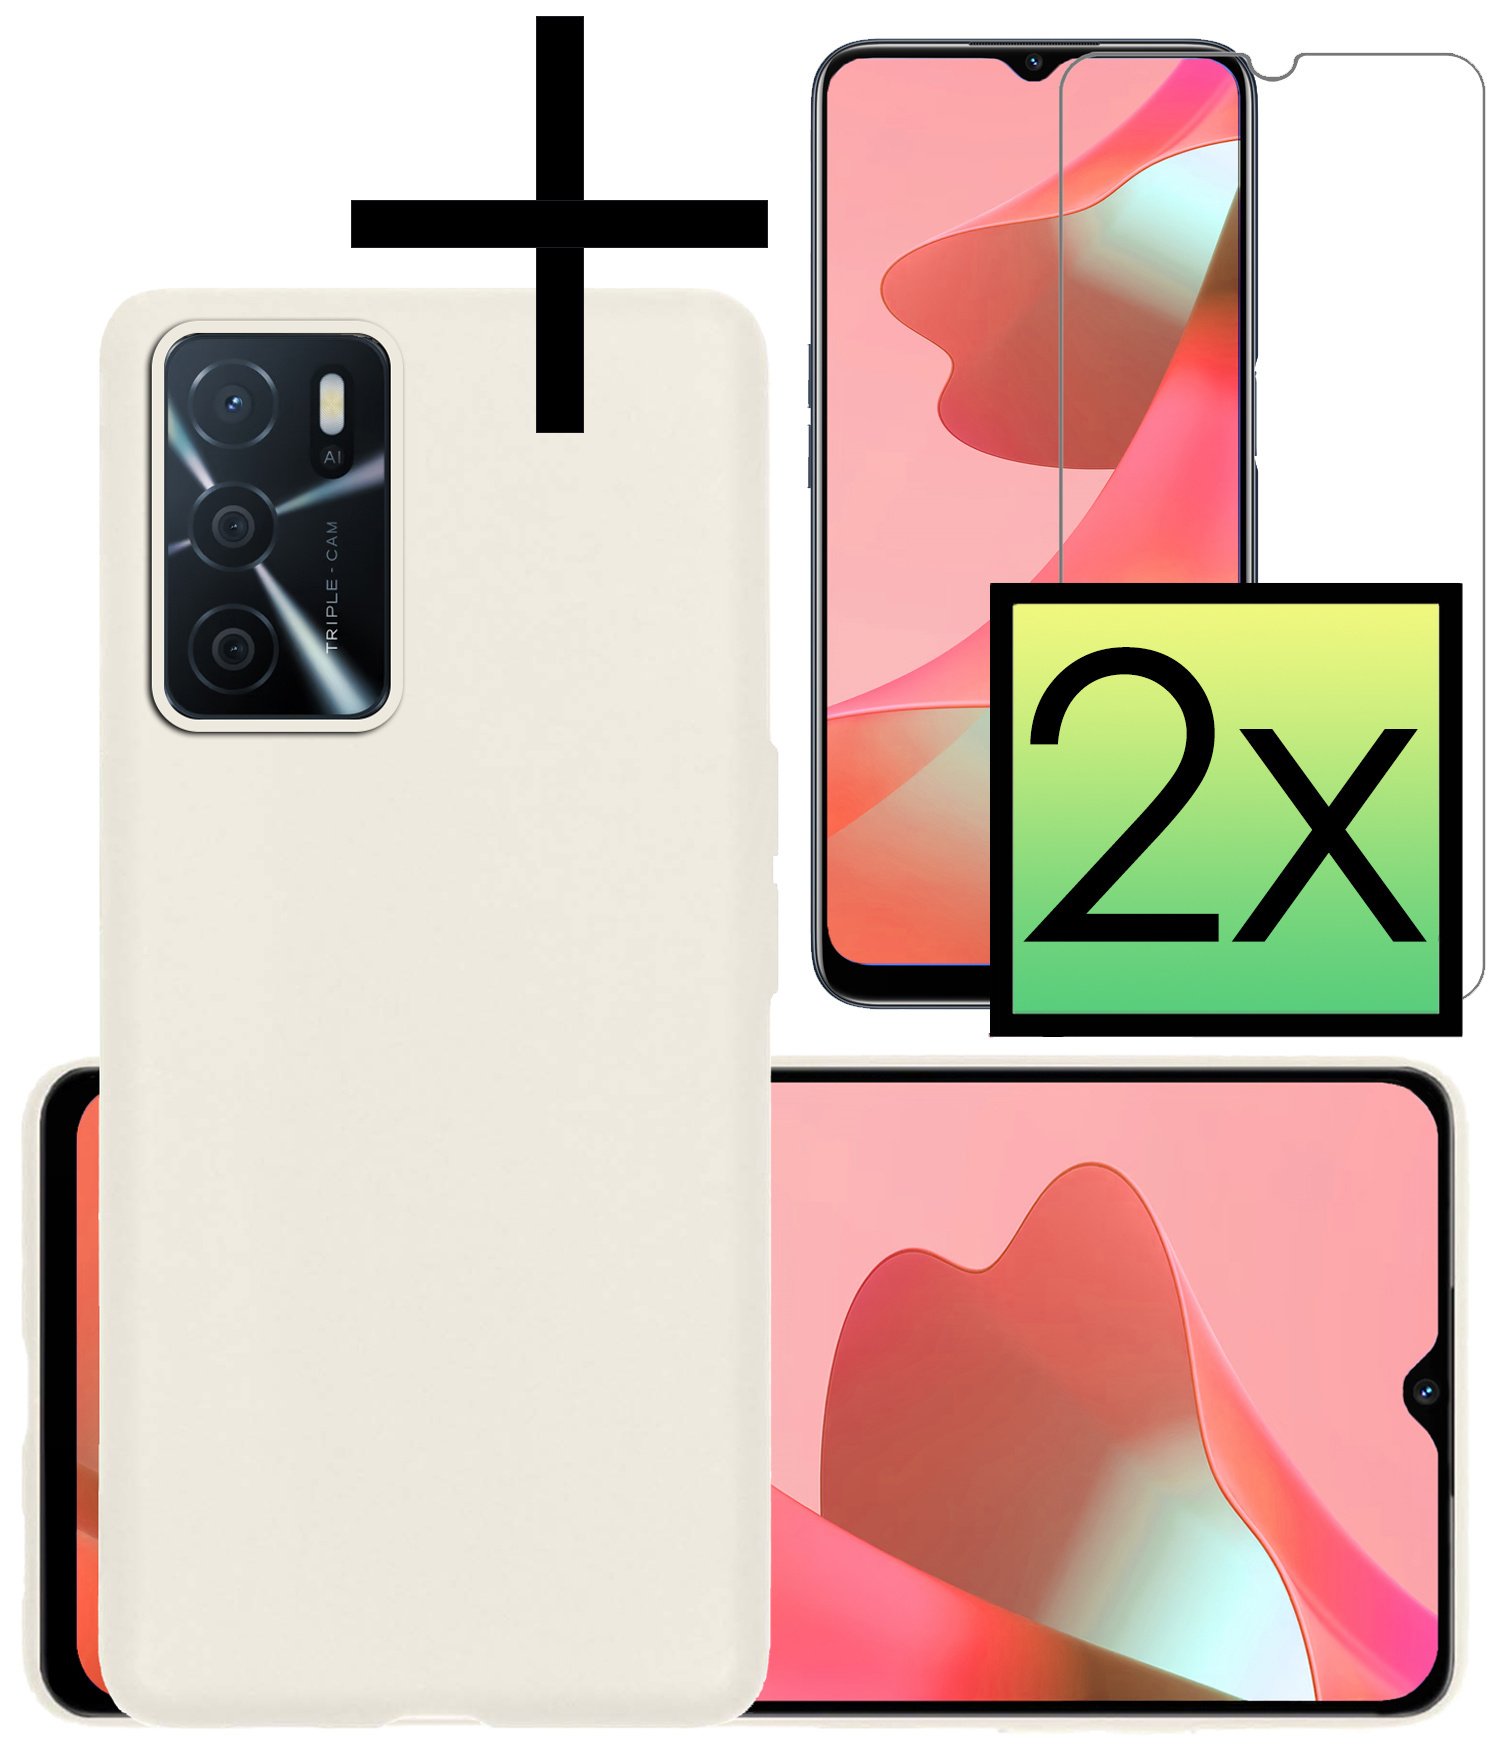 NoXx OPPO A16s Hoesje Back Cover Siliconen Case Hoes Met 2x Screenprotector - Wit